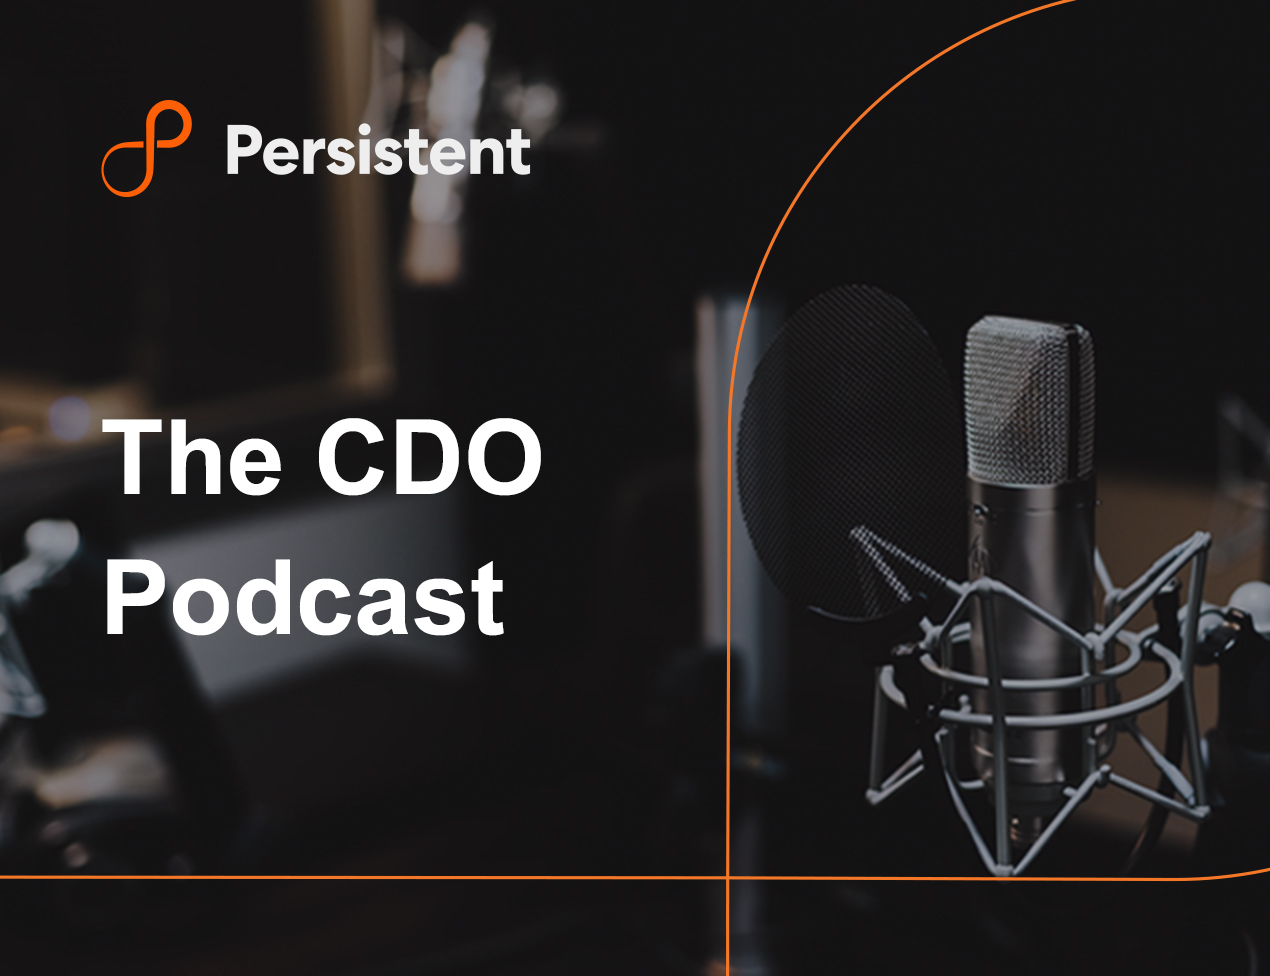 Podcast that helps you think like a CDO